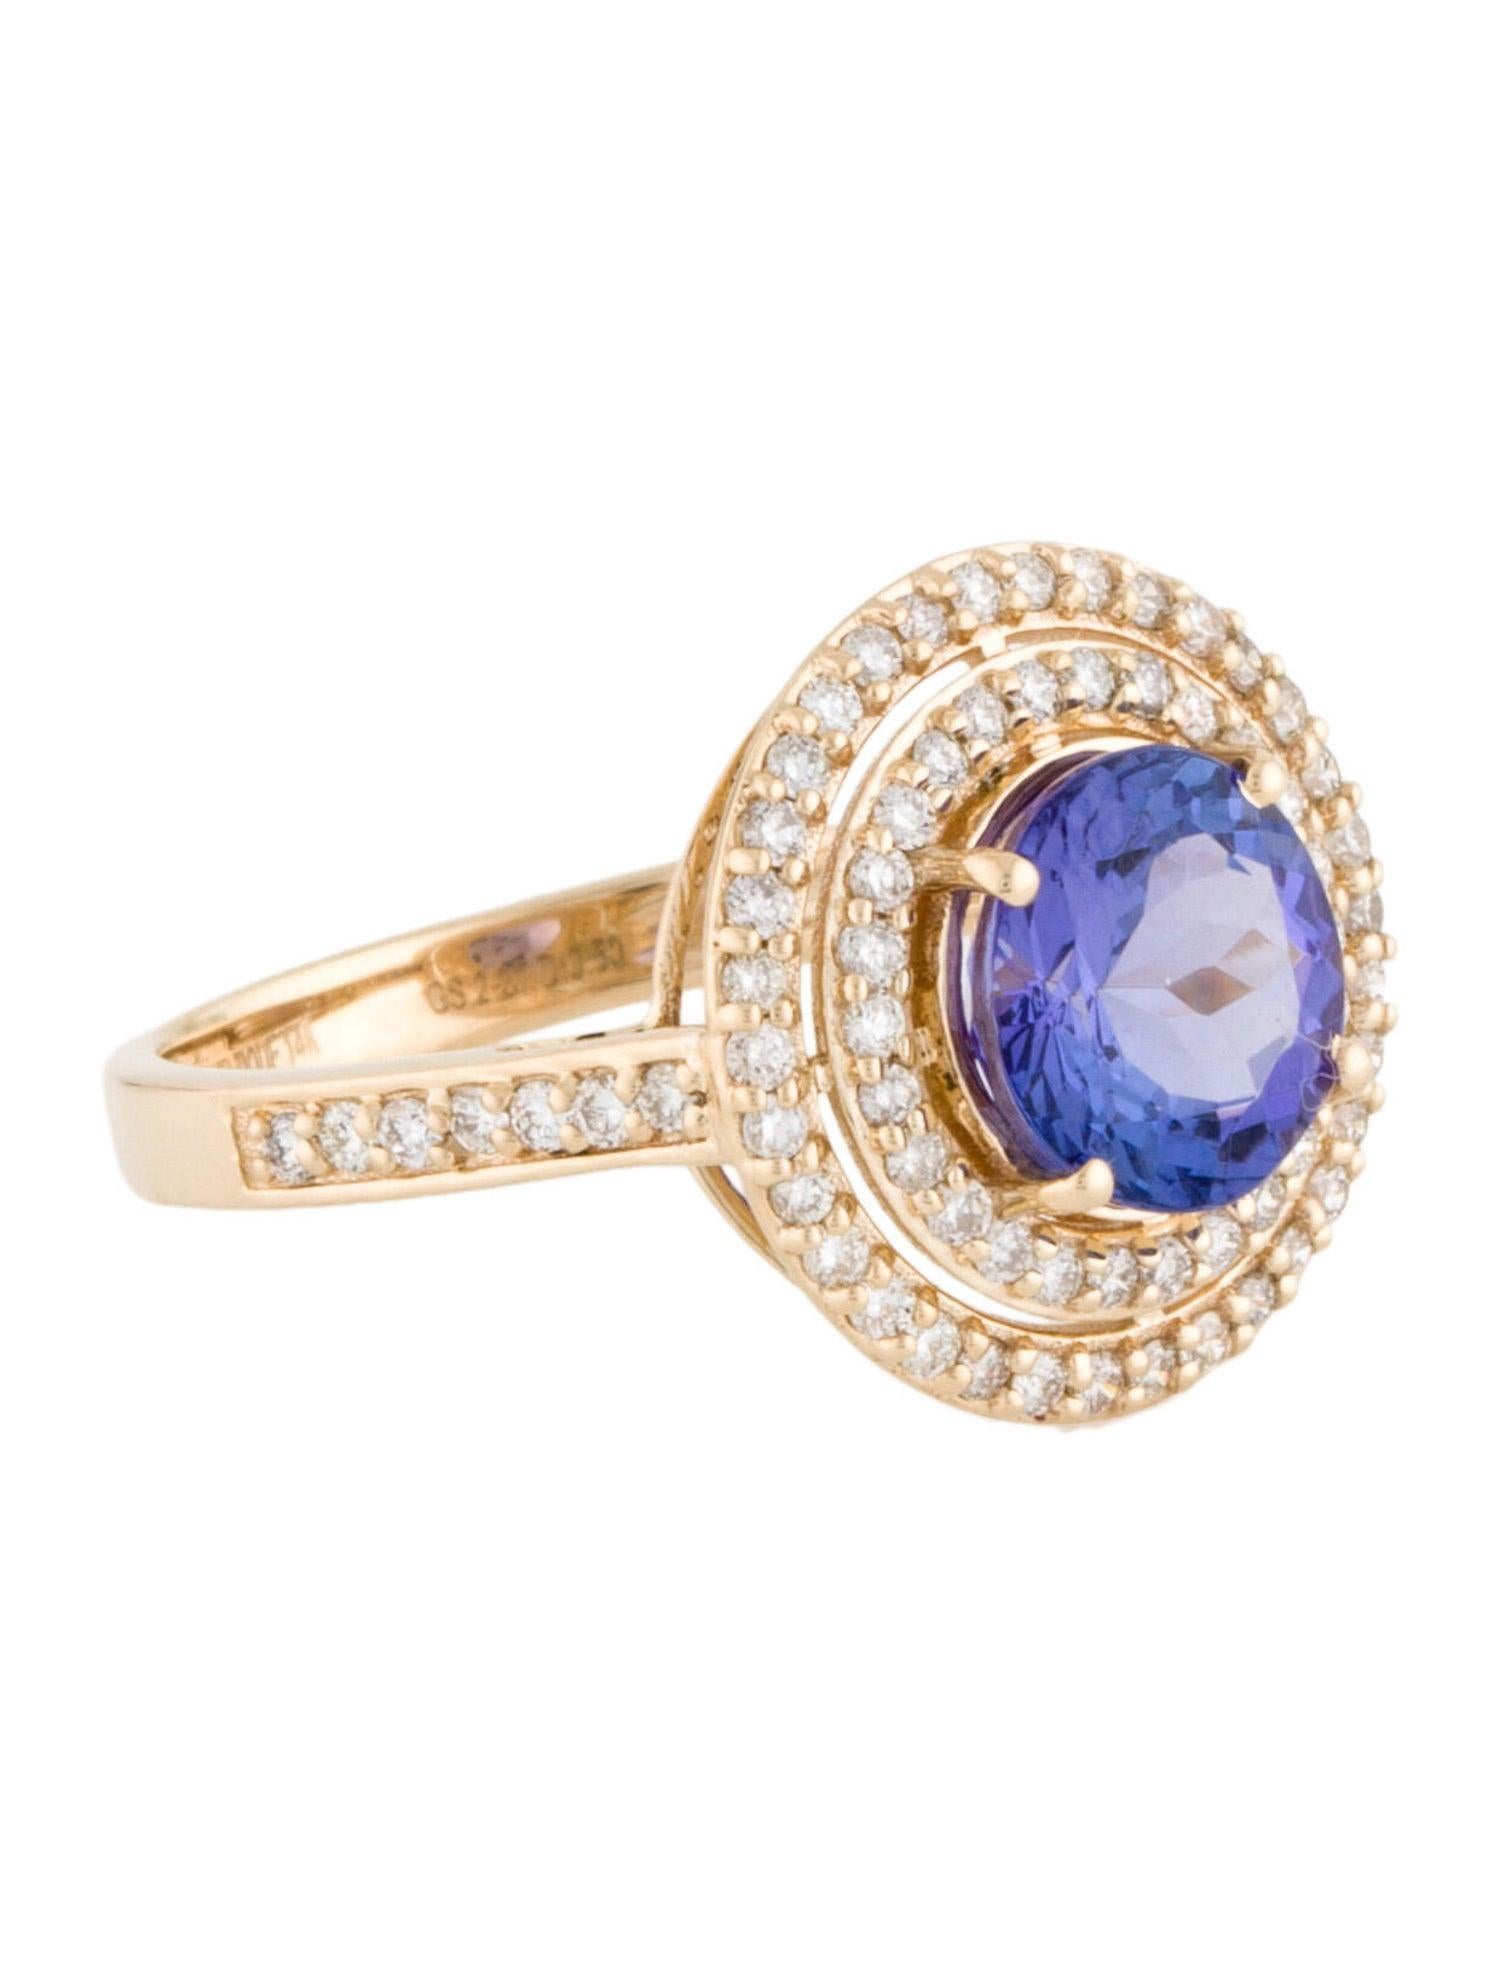 Introducing the Starry Night Tanzanite and Diamond Ring, a mesmerizing masterpiece from our exquisite collection, The Beauty of the Night Sky. This premium ring encapsulates the ethereal allure of the night sky, paying homage to the celestial